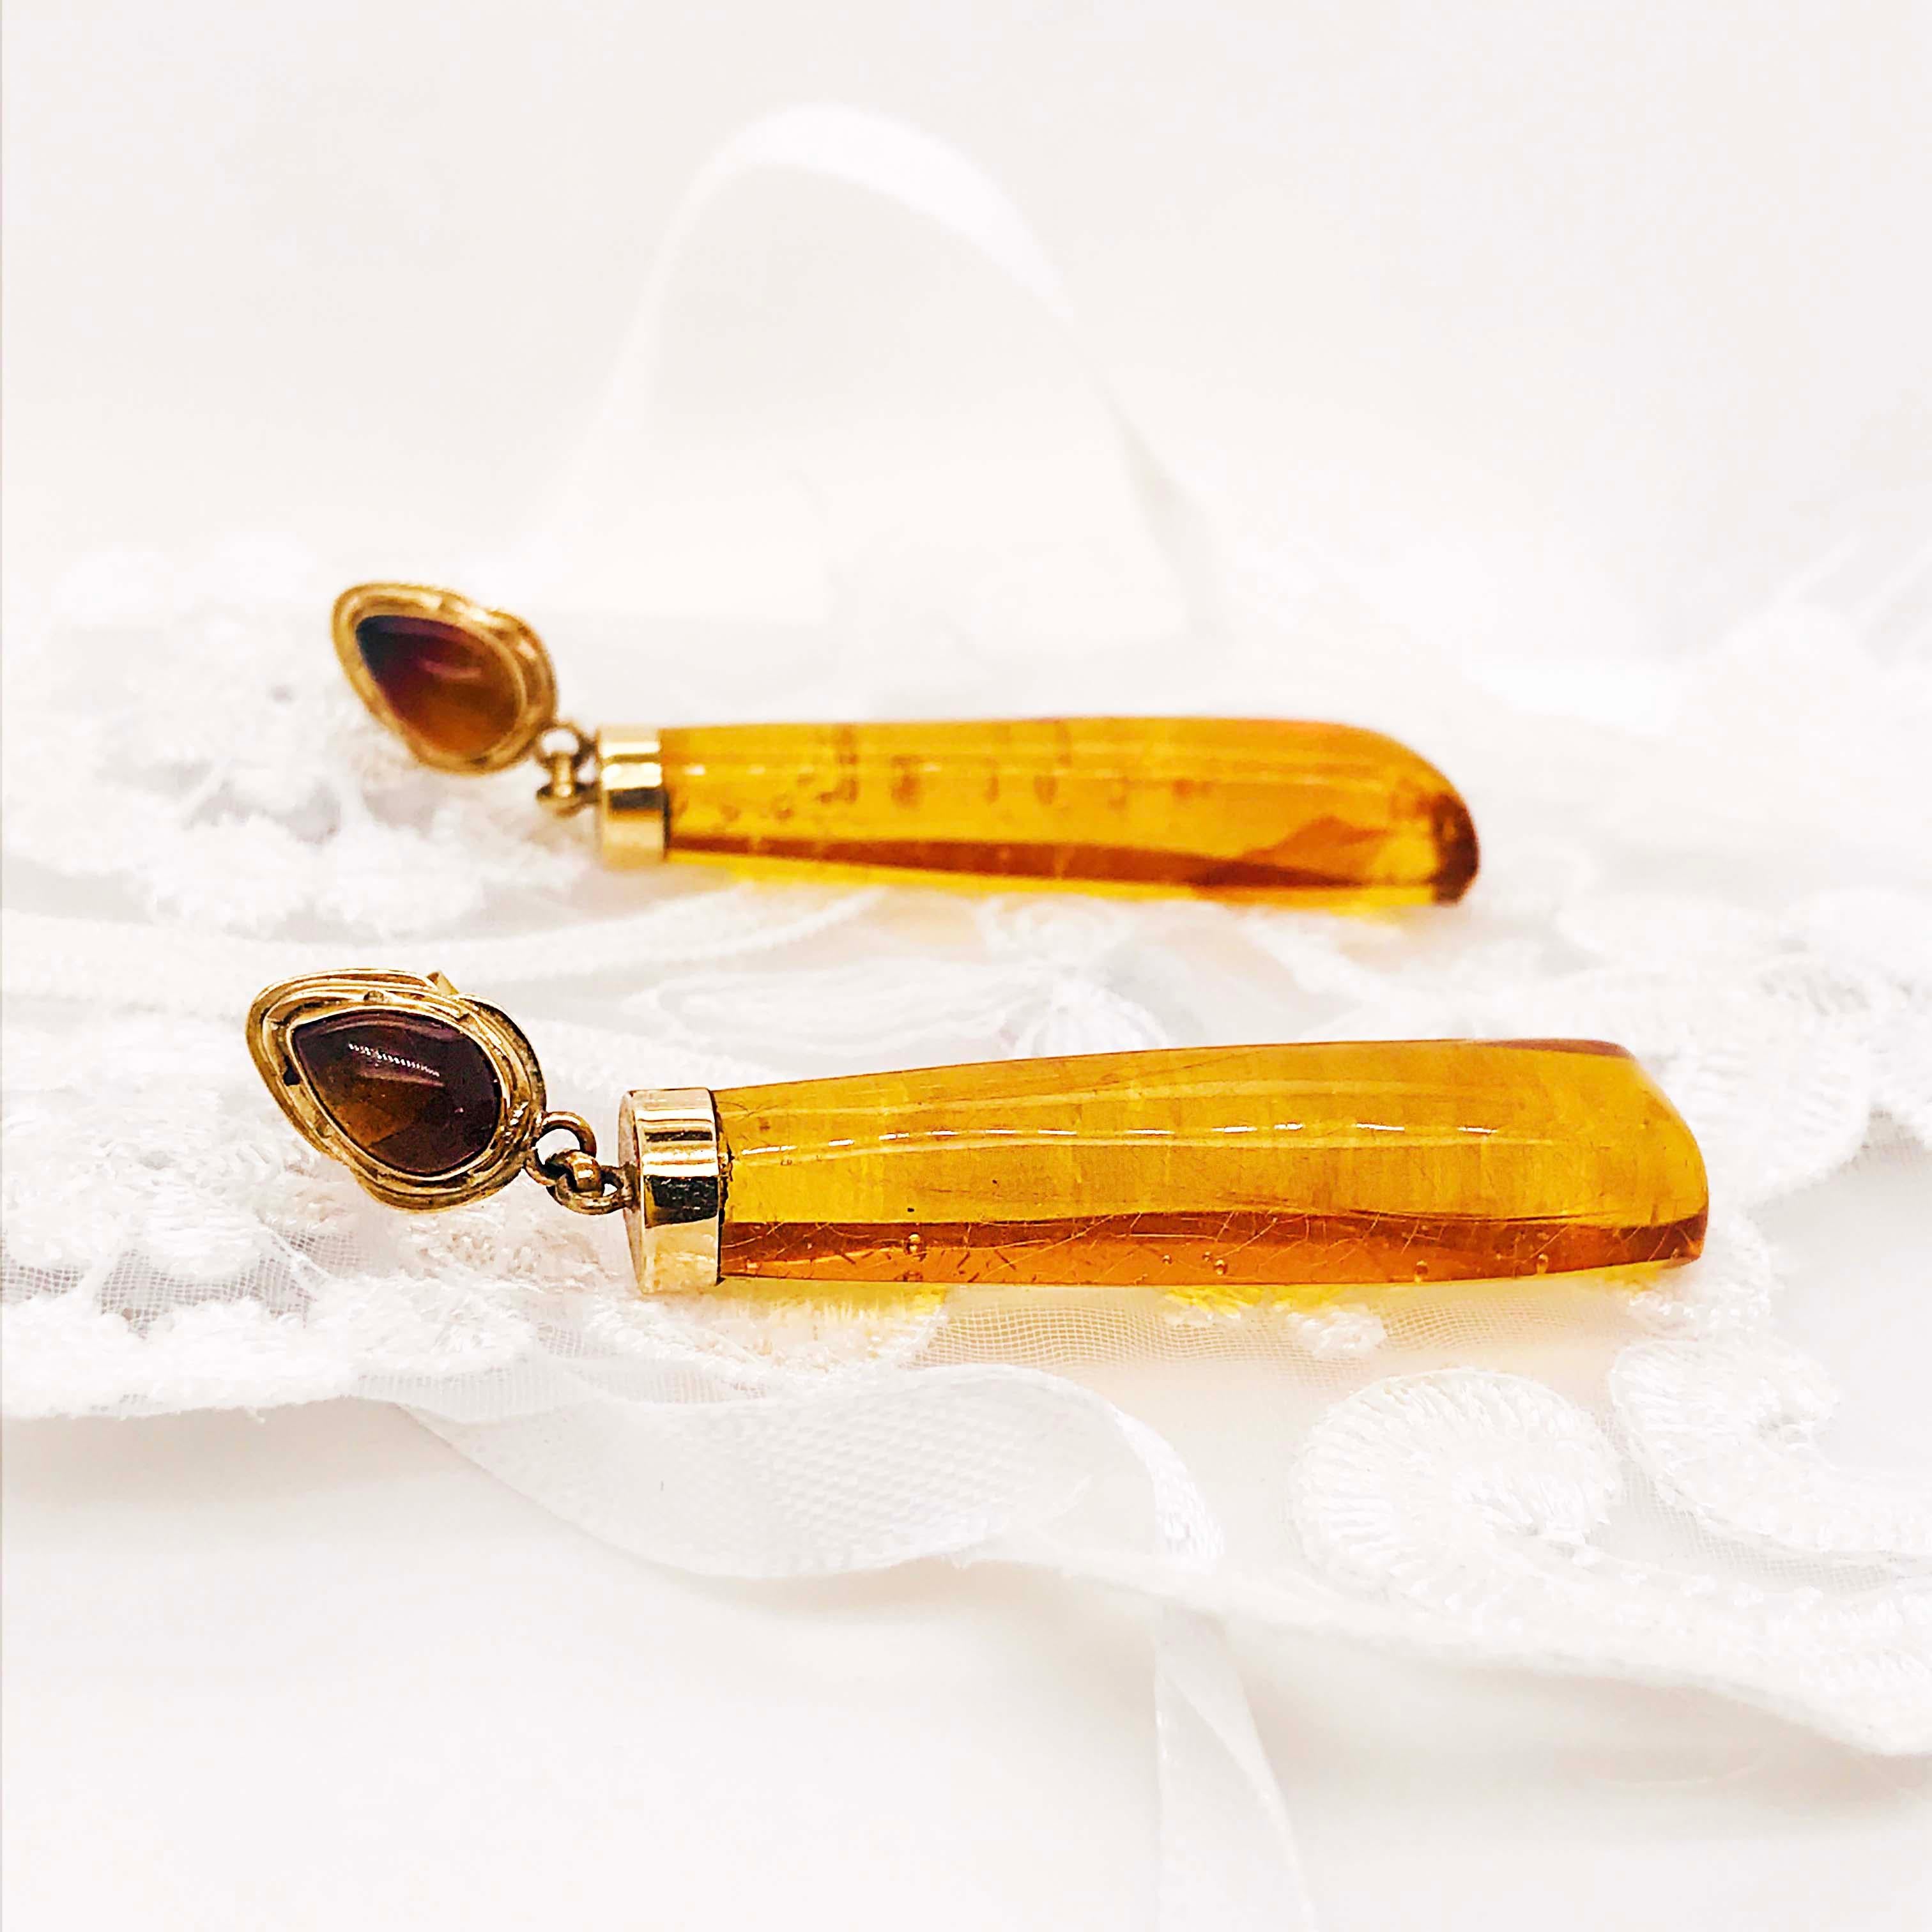 These Baltic Sea Amber earrings are one of a kind! CIRCA 1978 these earrings have amazing genuine amber pieces that have been hand made and polished to produce the most unique design. Baltic Sea amber was formed over 45 million years ago! It is used